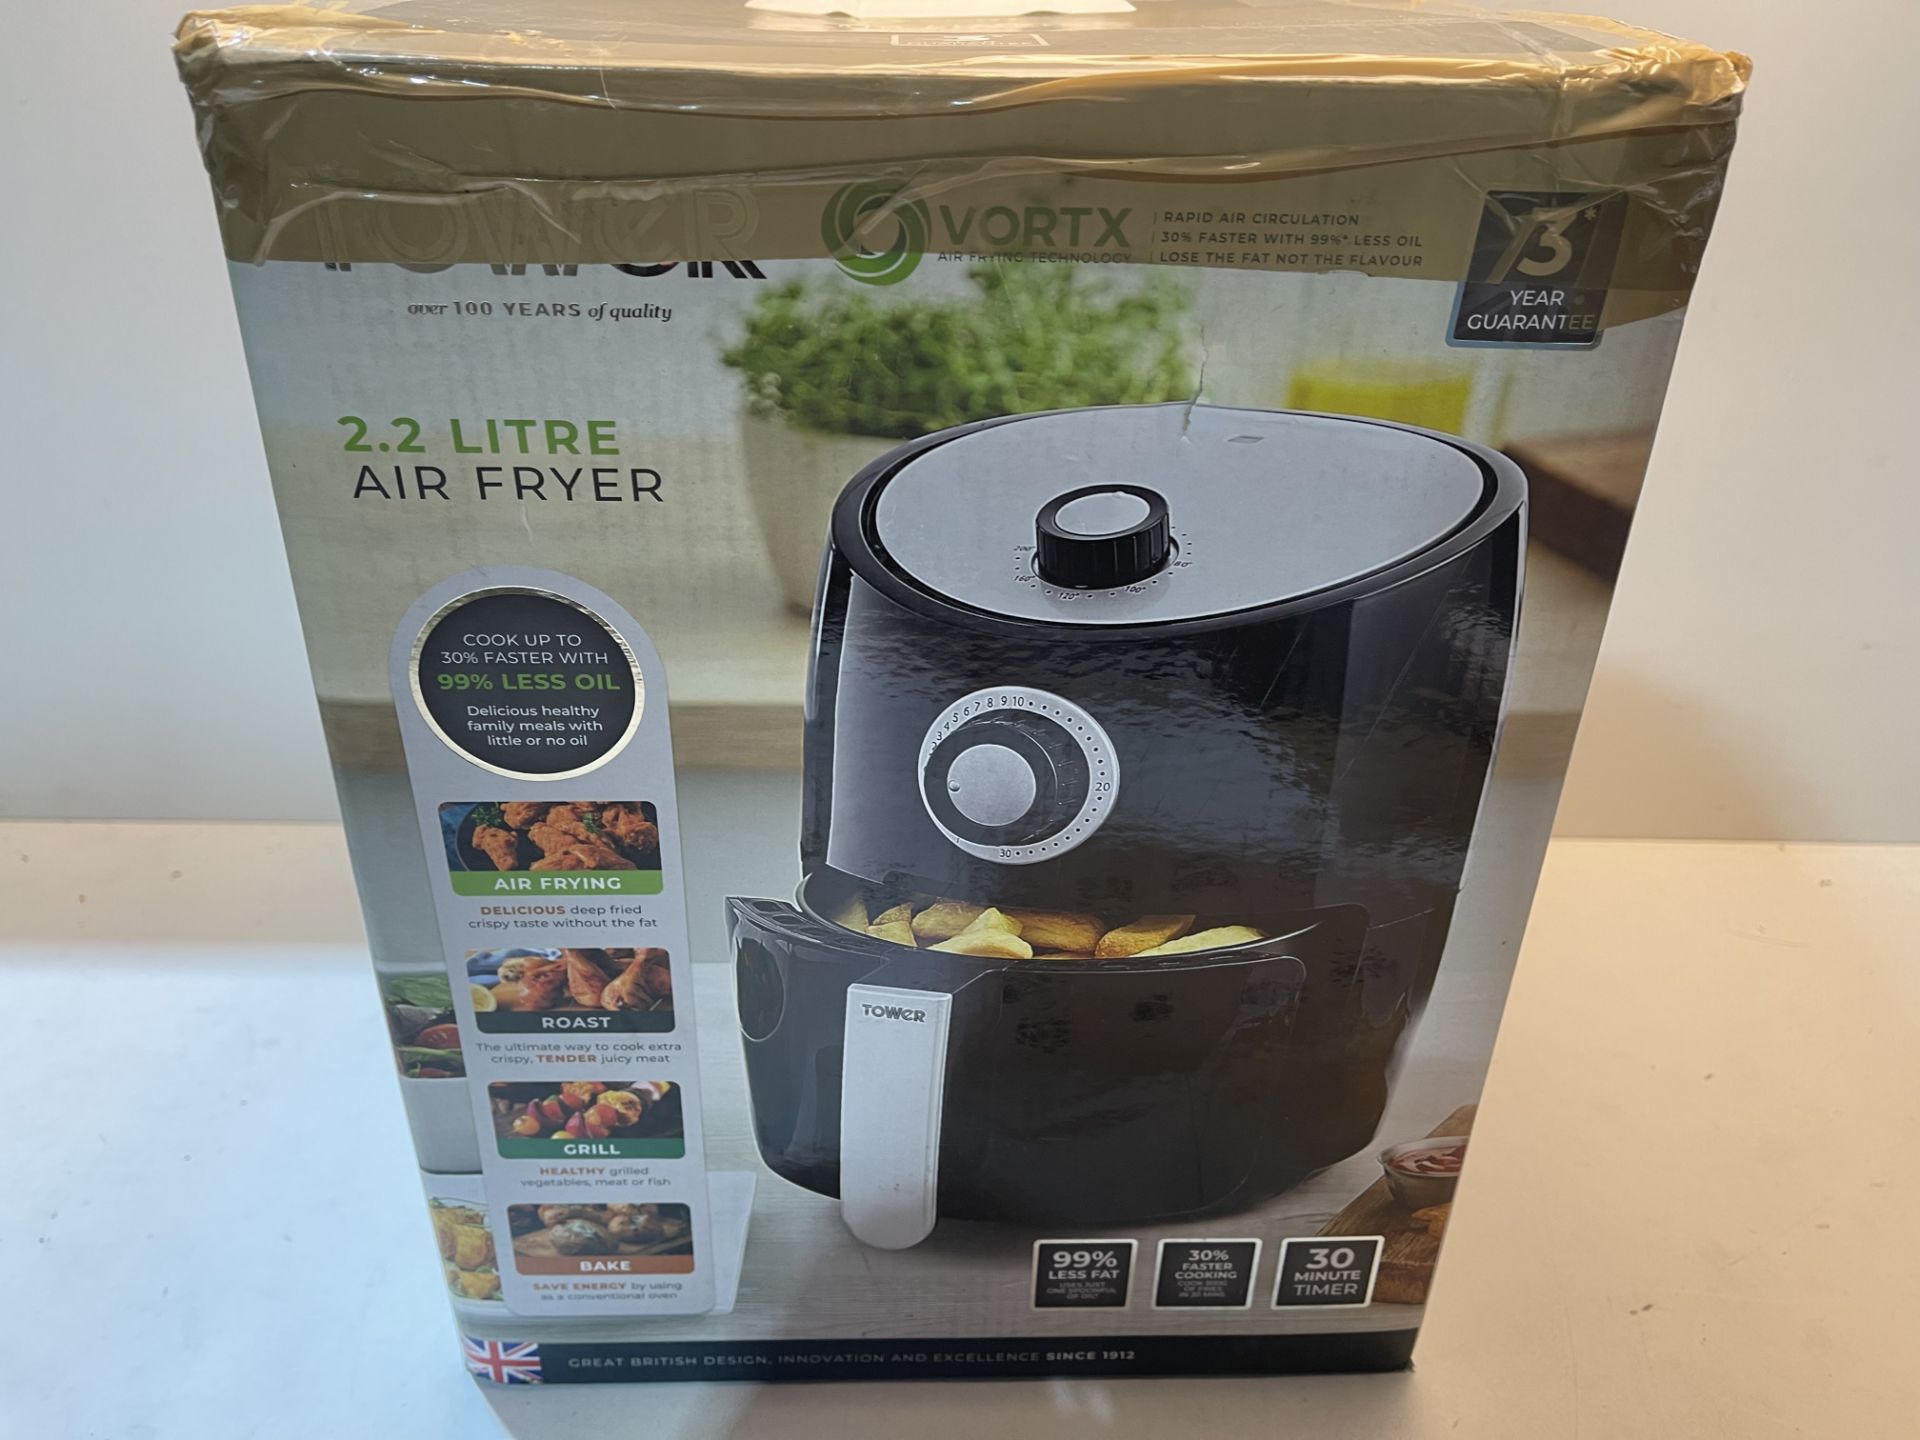 Tower T17023 Air Fryer Oven with Rapid Air Circulation and 30 Min Timer, 2.2 Litre, Black £44.